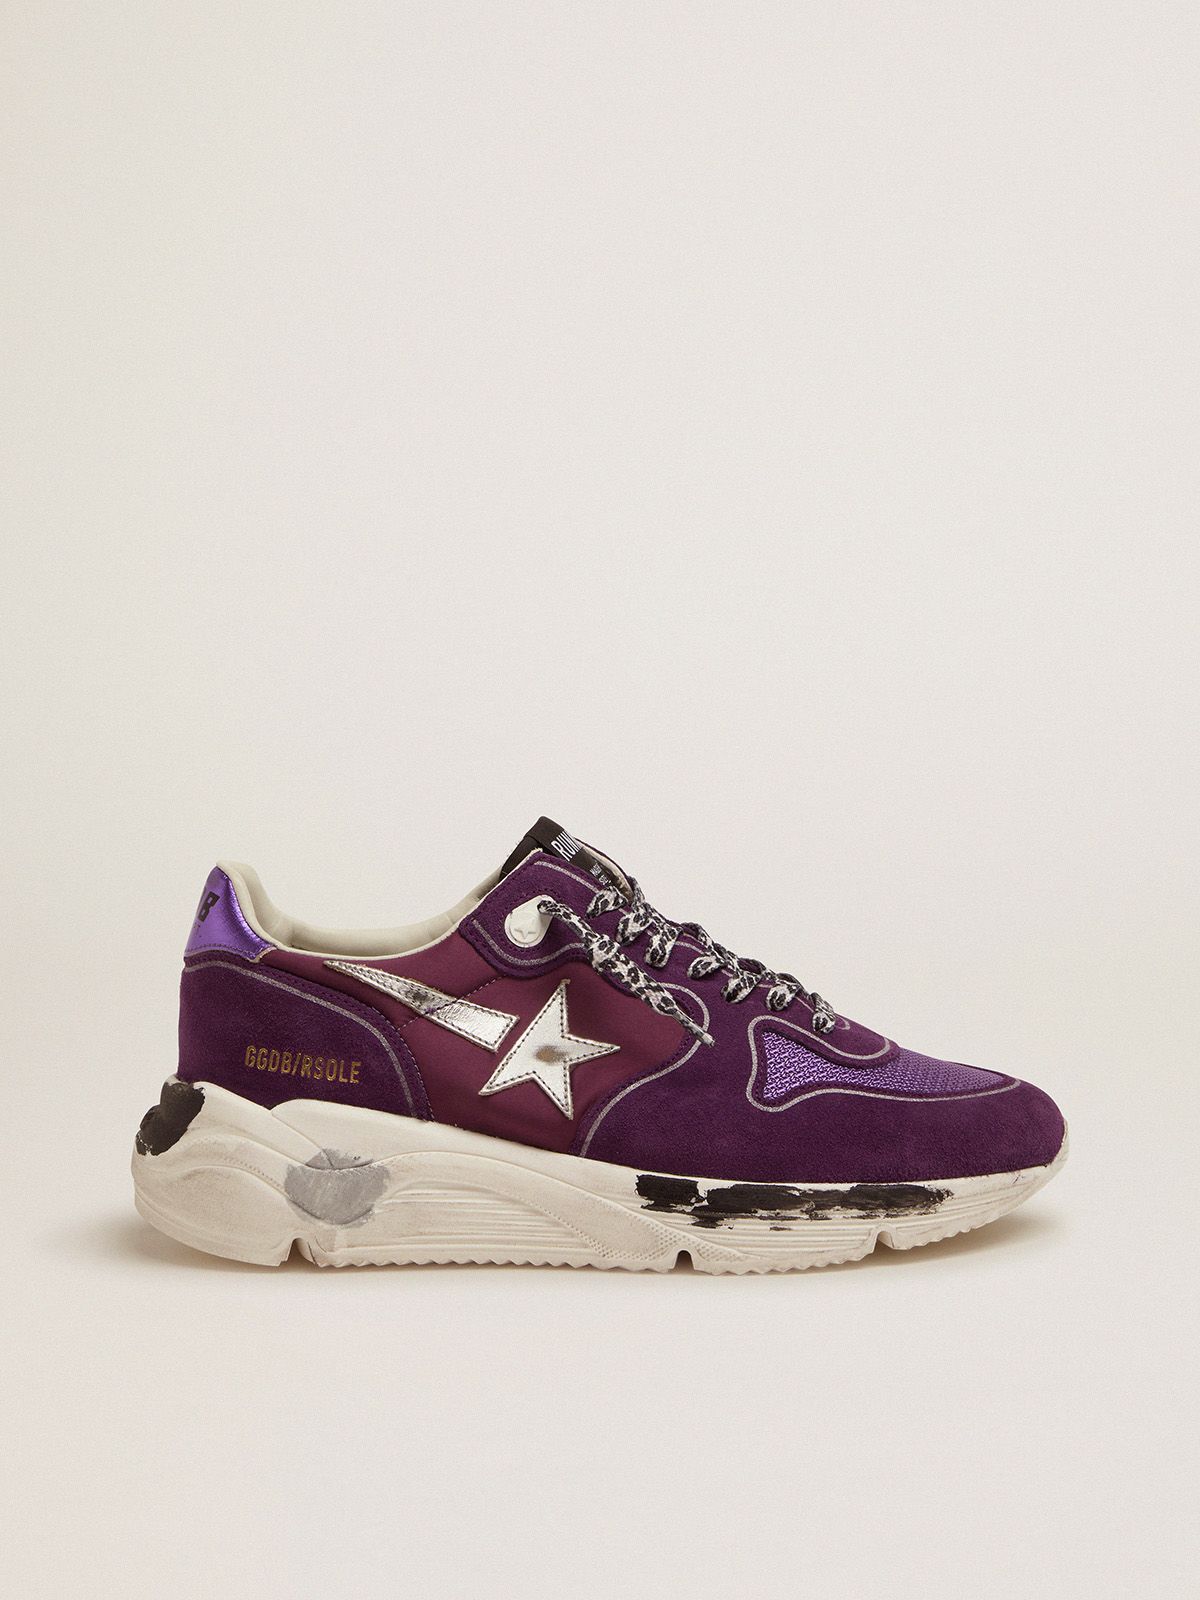 Golden Goose Ball Star Uomo Suede, leather and mesh Running Sole sneakers with metallic purple heel tab